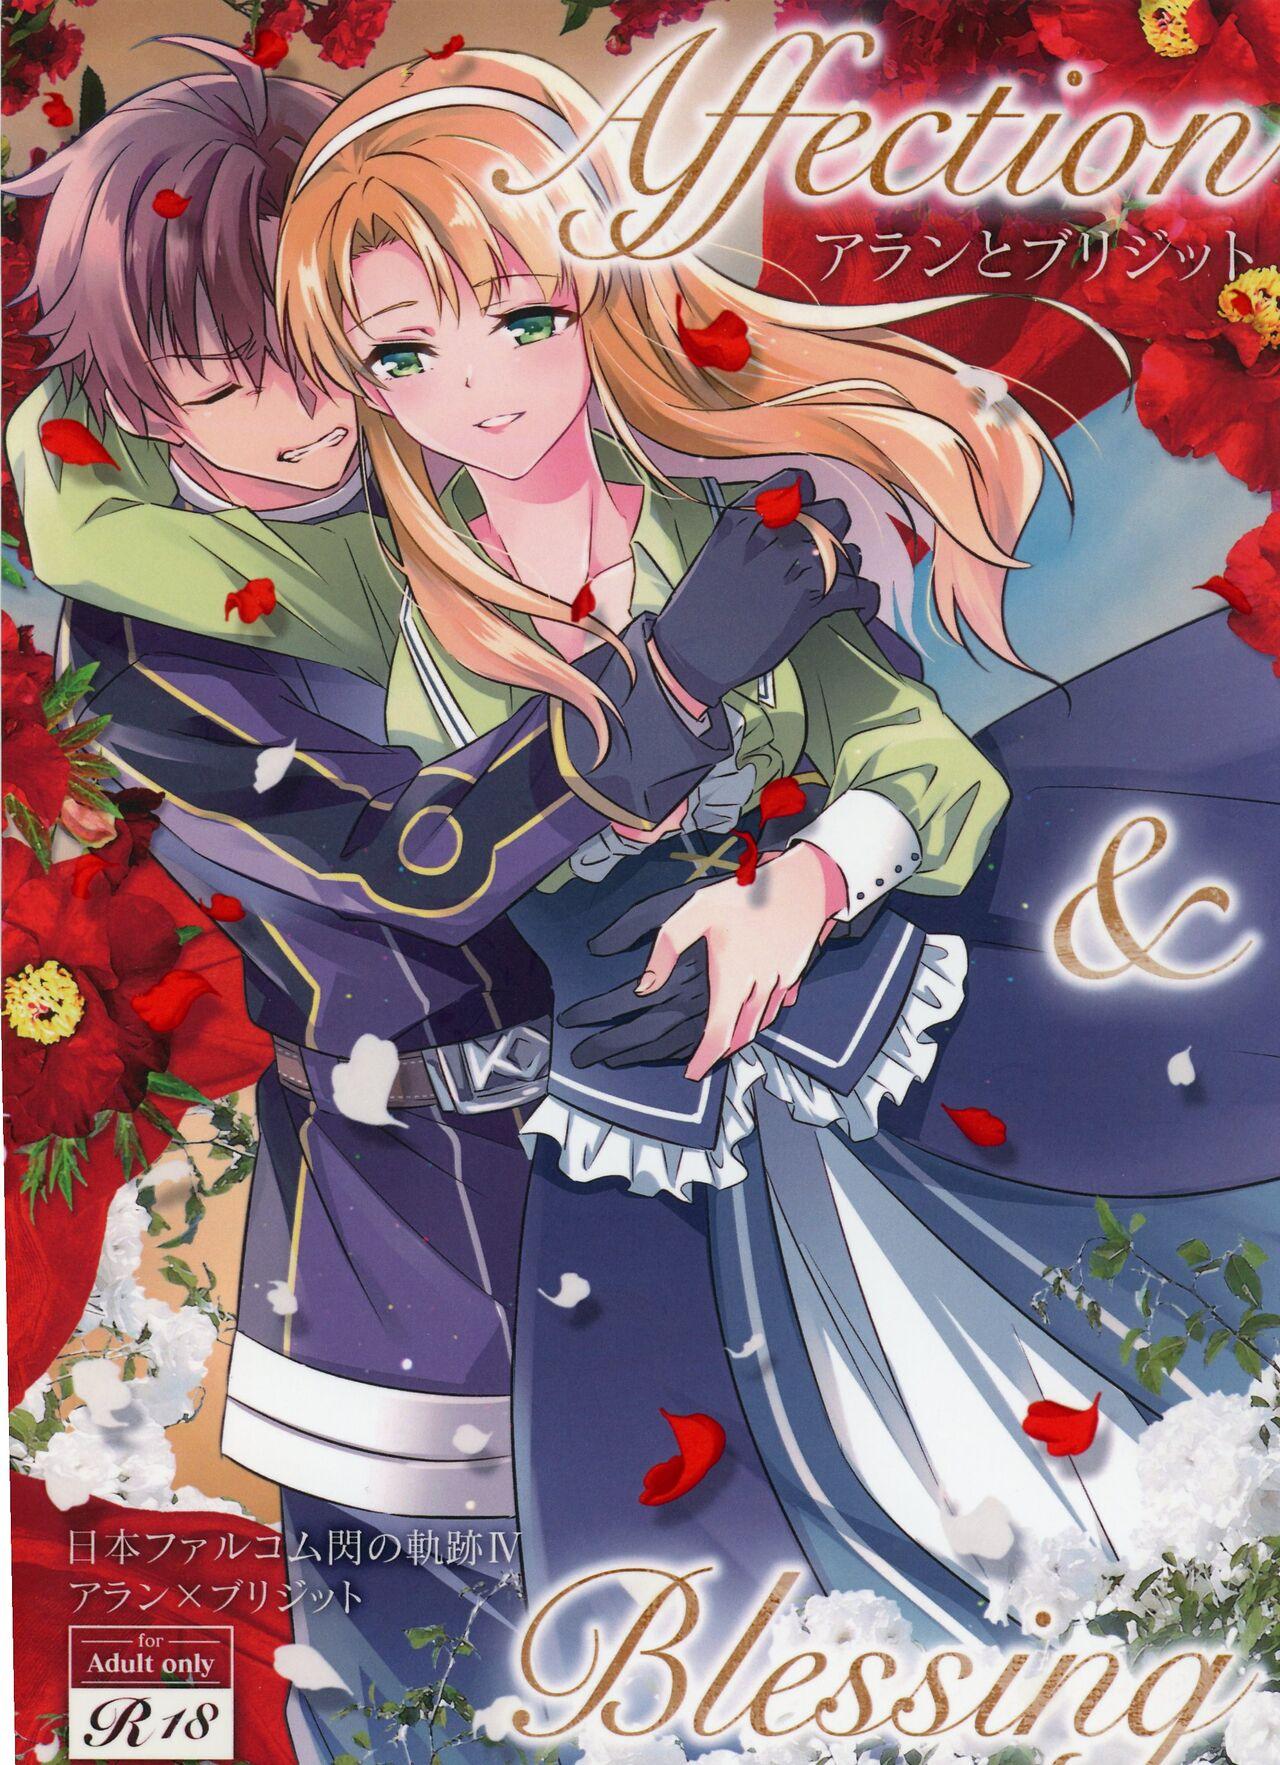 Pene Affection & Blessing - The legend of heroes | eiyuu densetsu Indonesia - Page 1